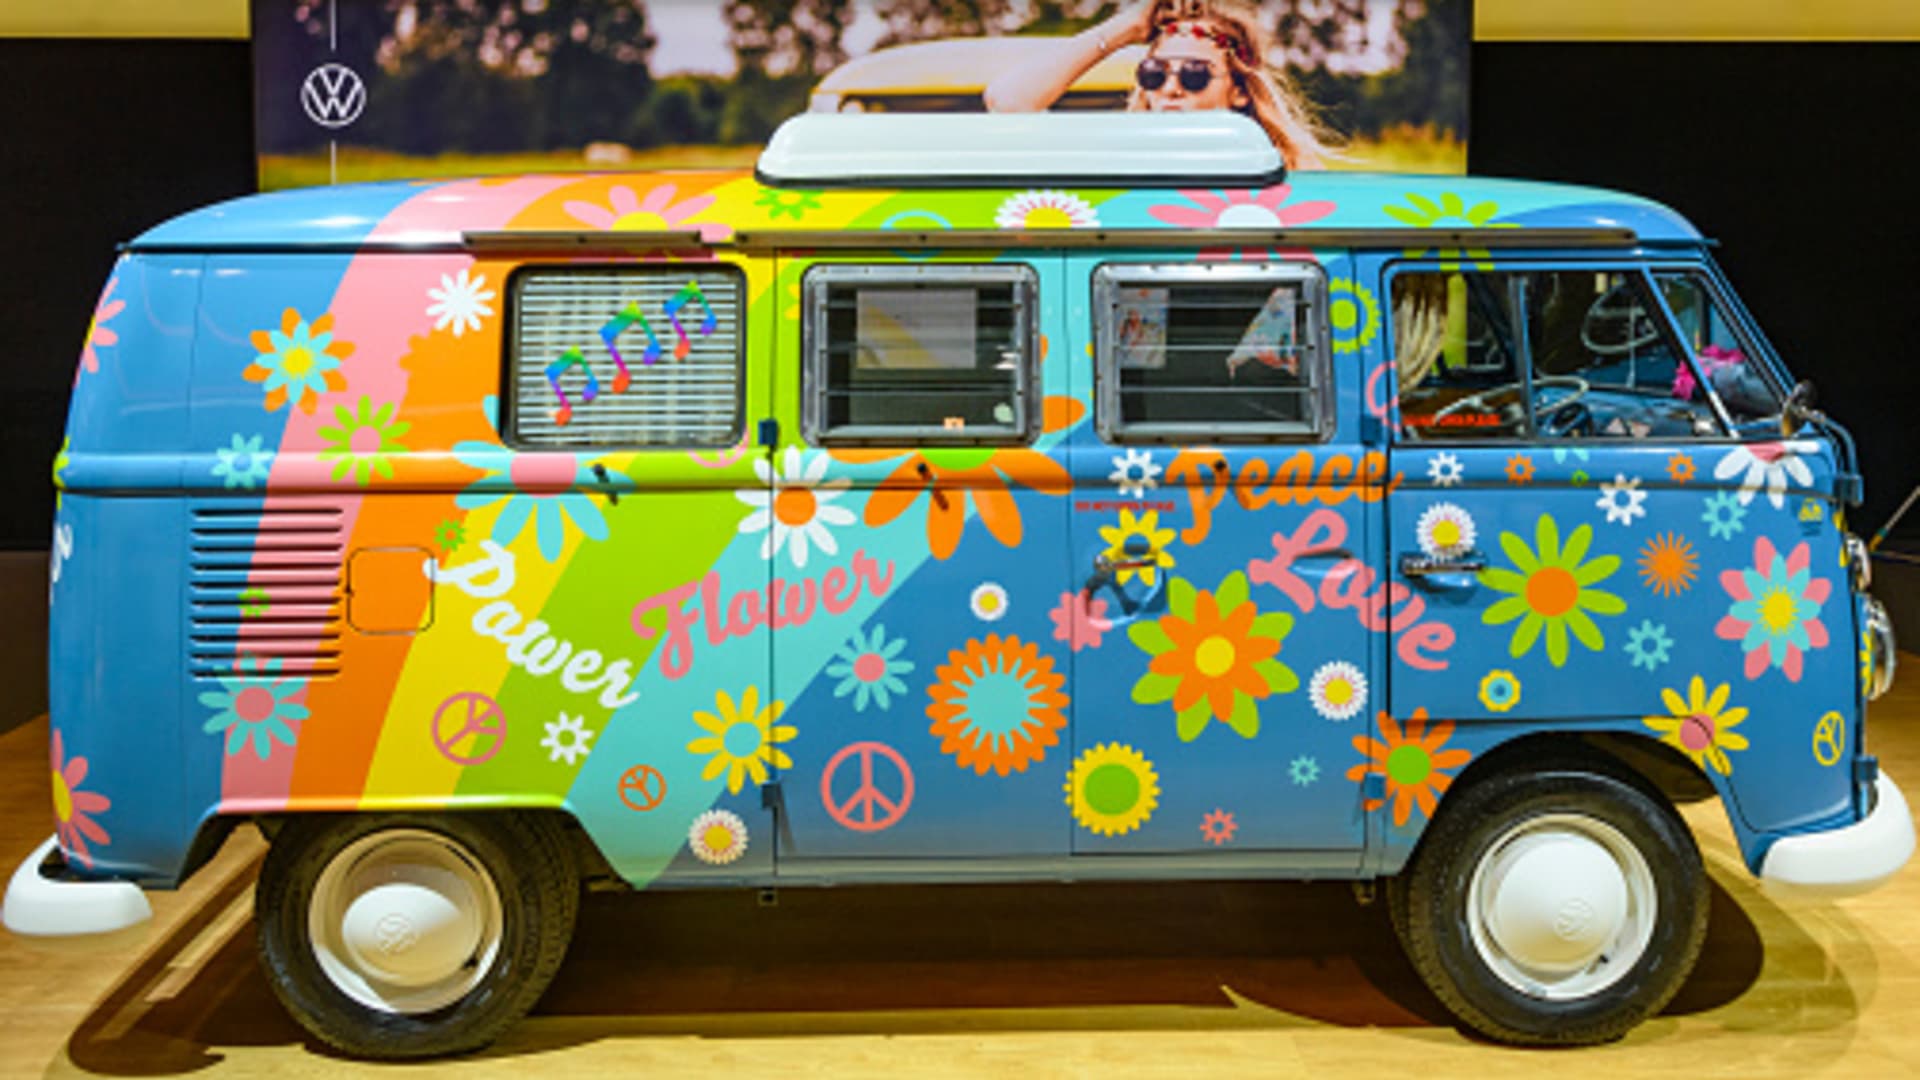 After the ‘hippie’ bus and the Beetle, VW is looking at America again